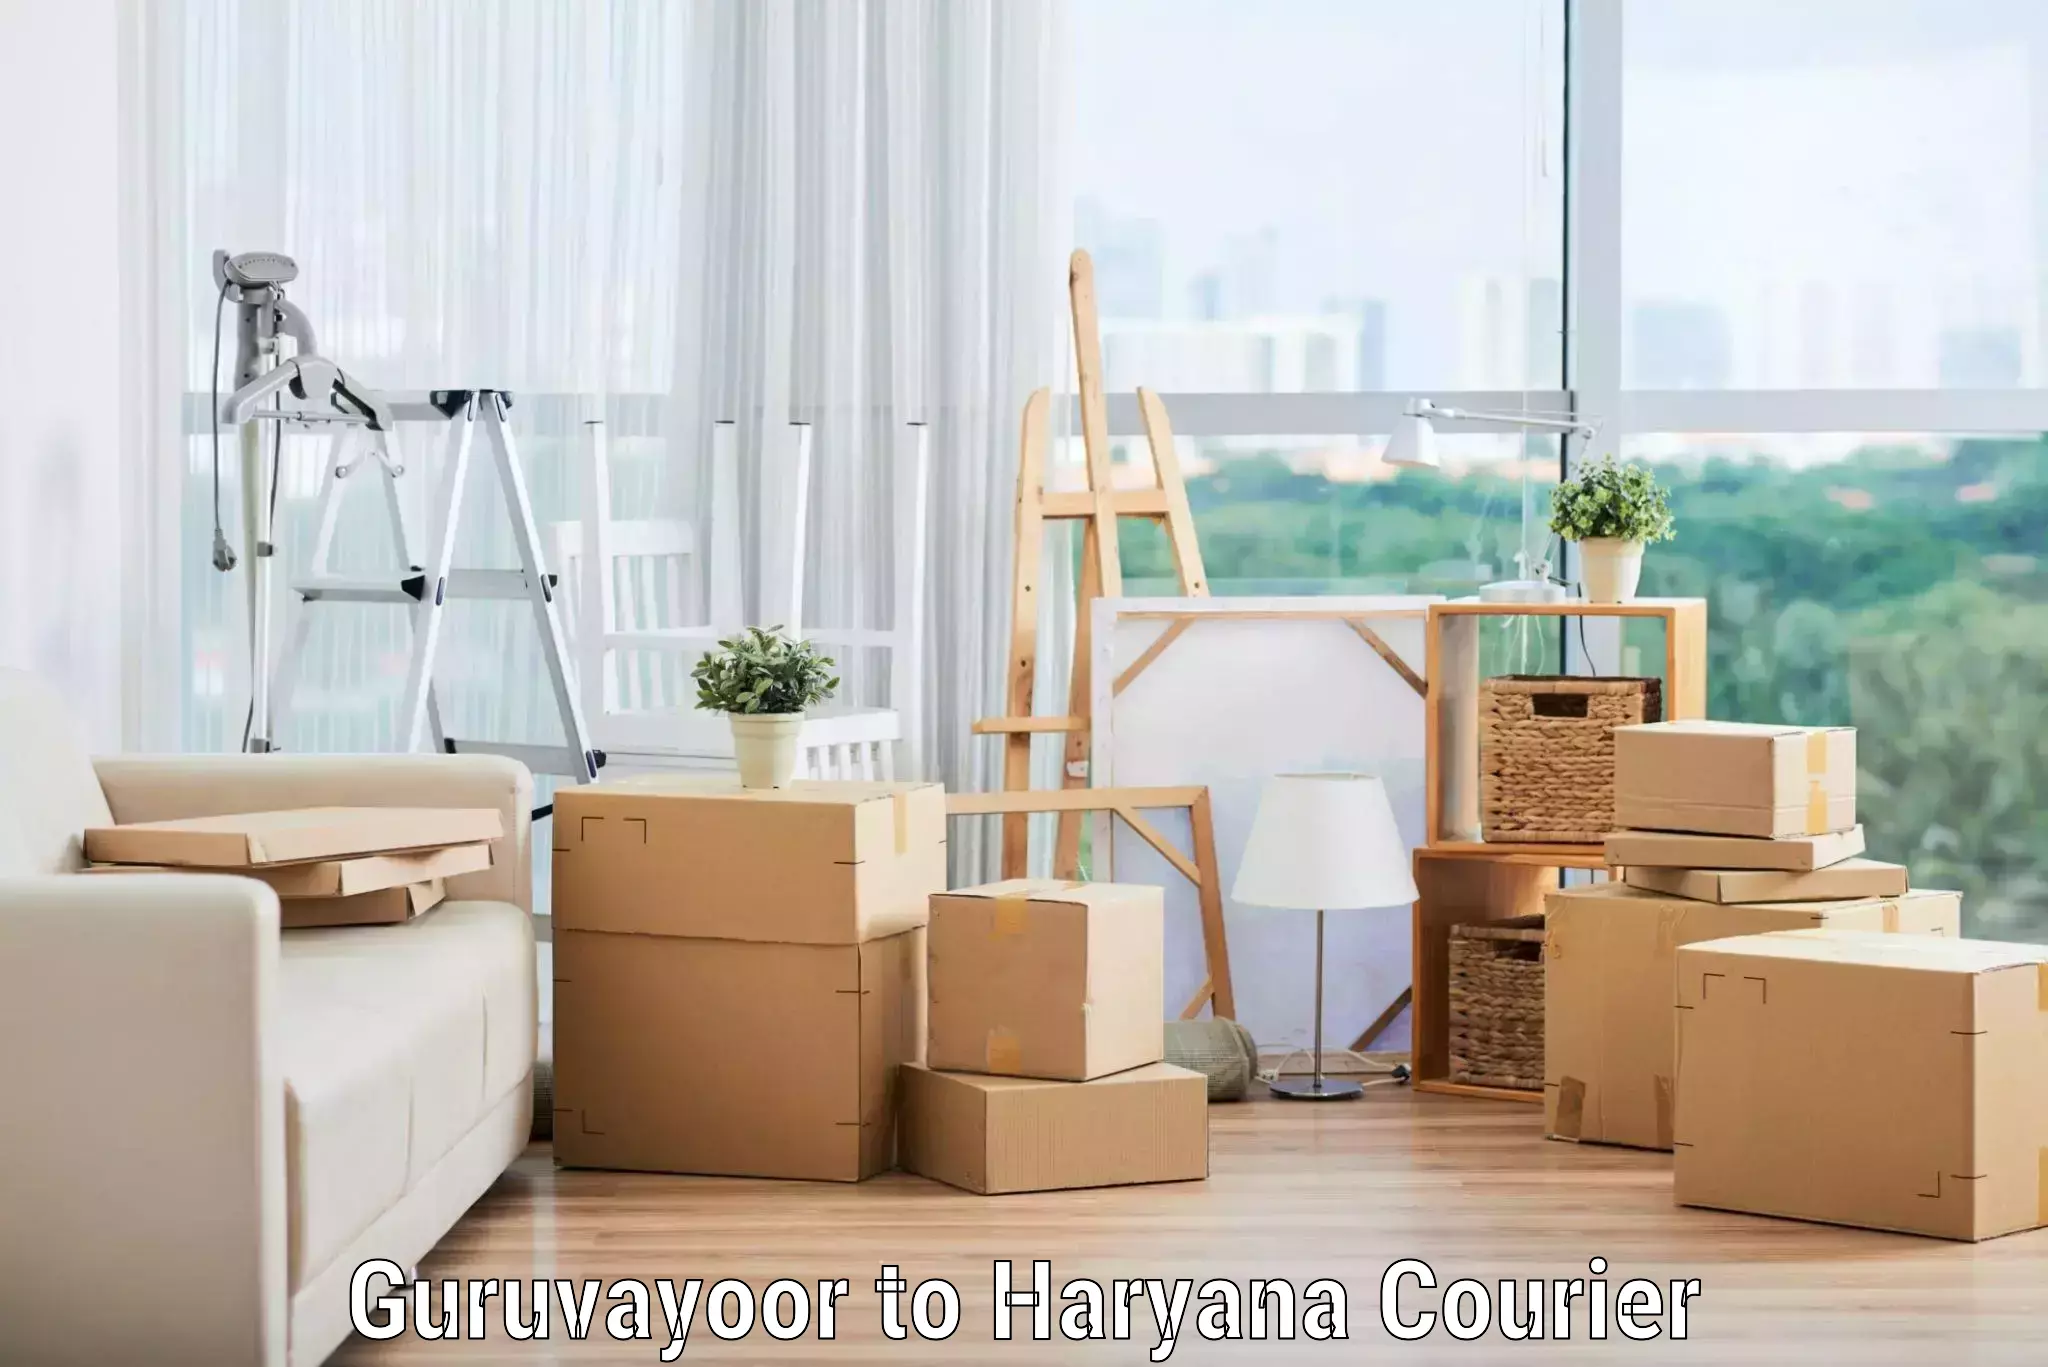 Trusted relocation experts Guruvayoor to Odhan